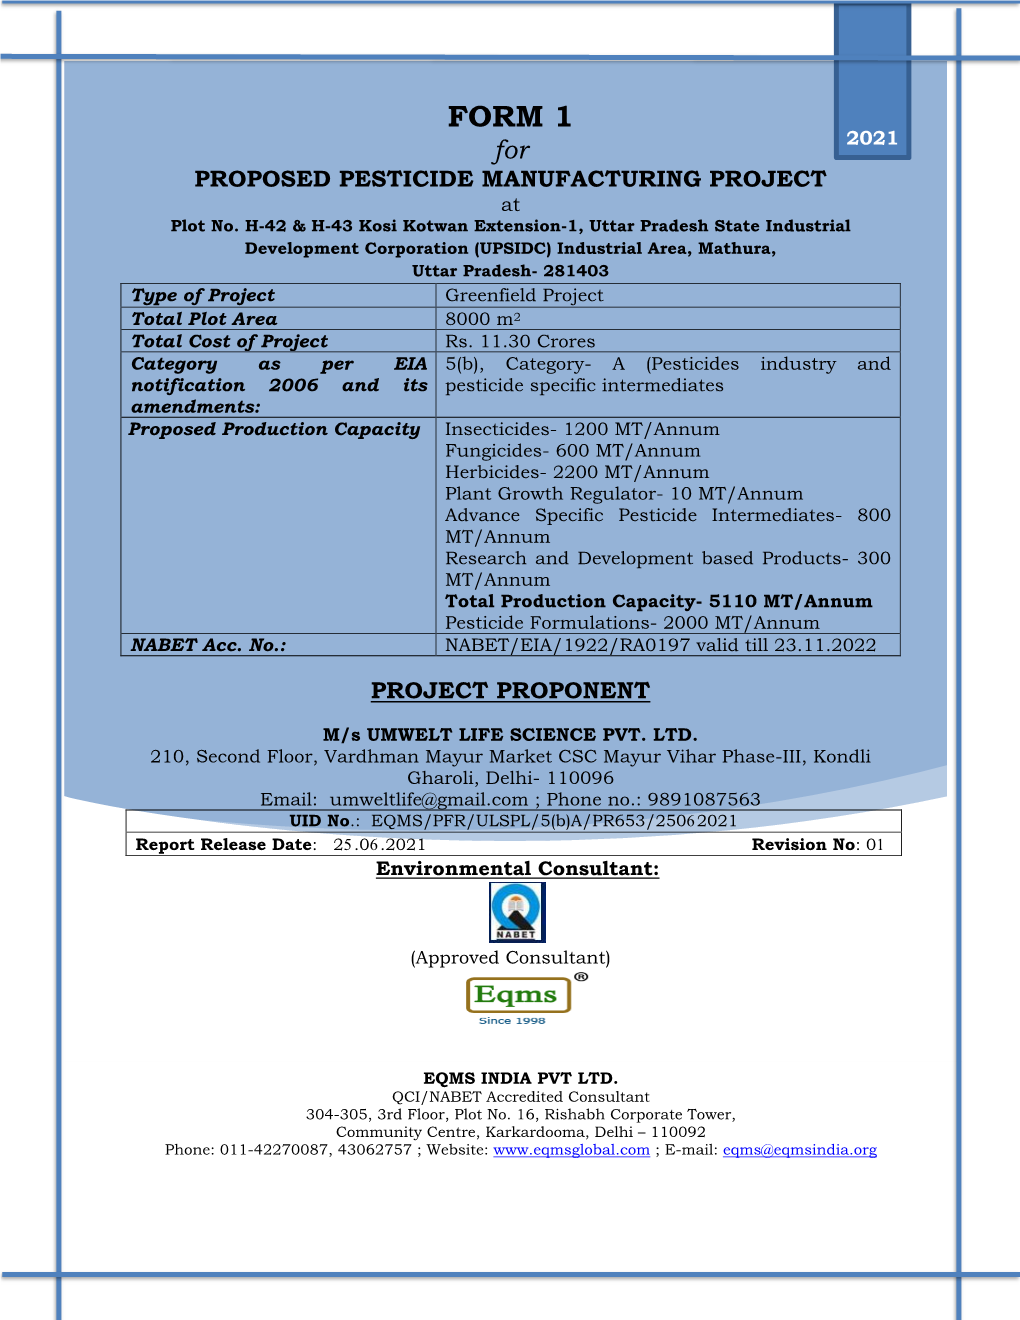 FORM 1 for 2021 PROPOSED PESTICIDE MANUFACTURING PROJECT at Plot No